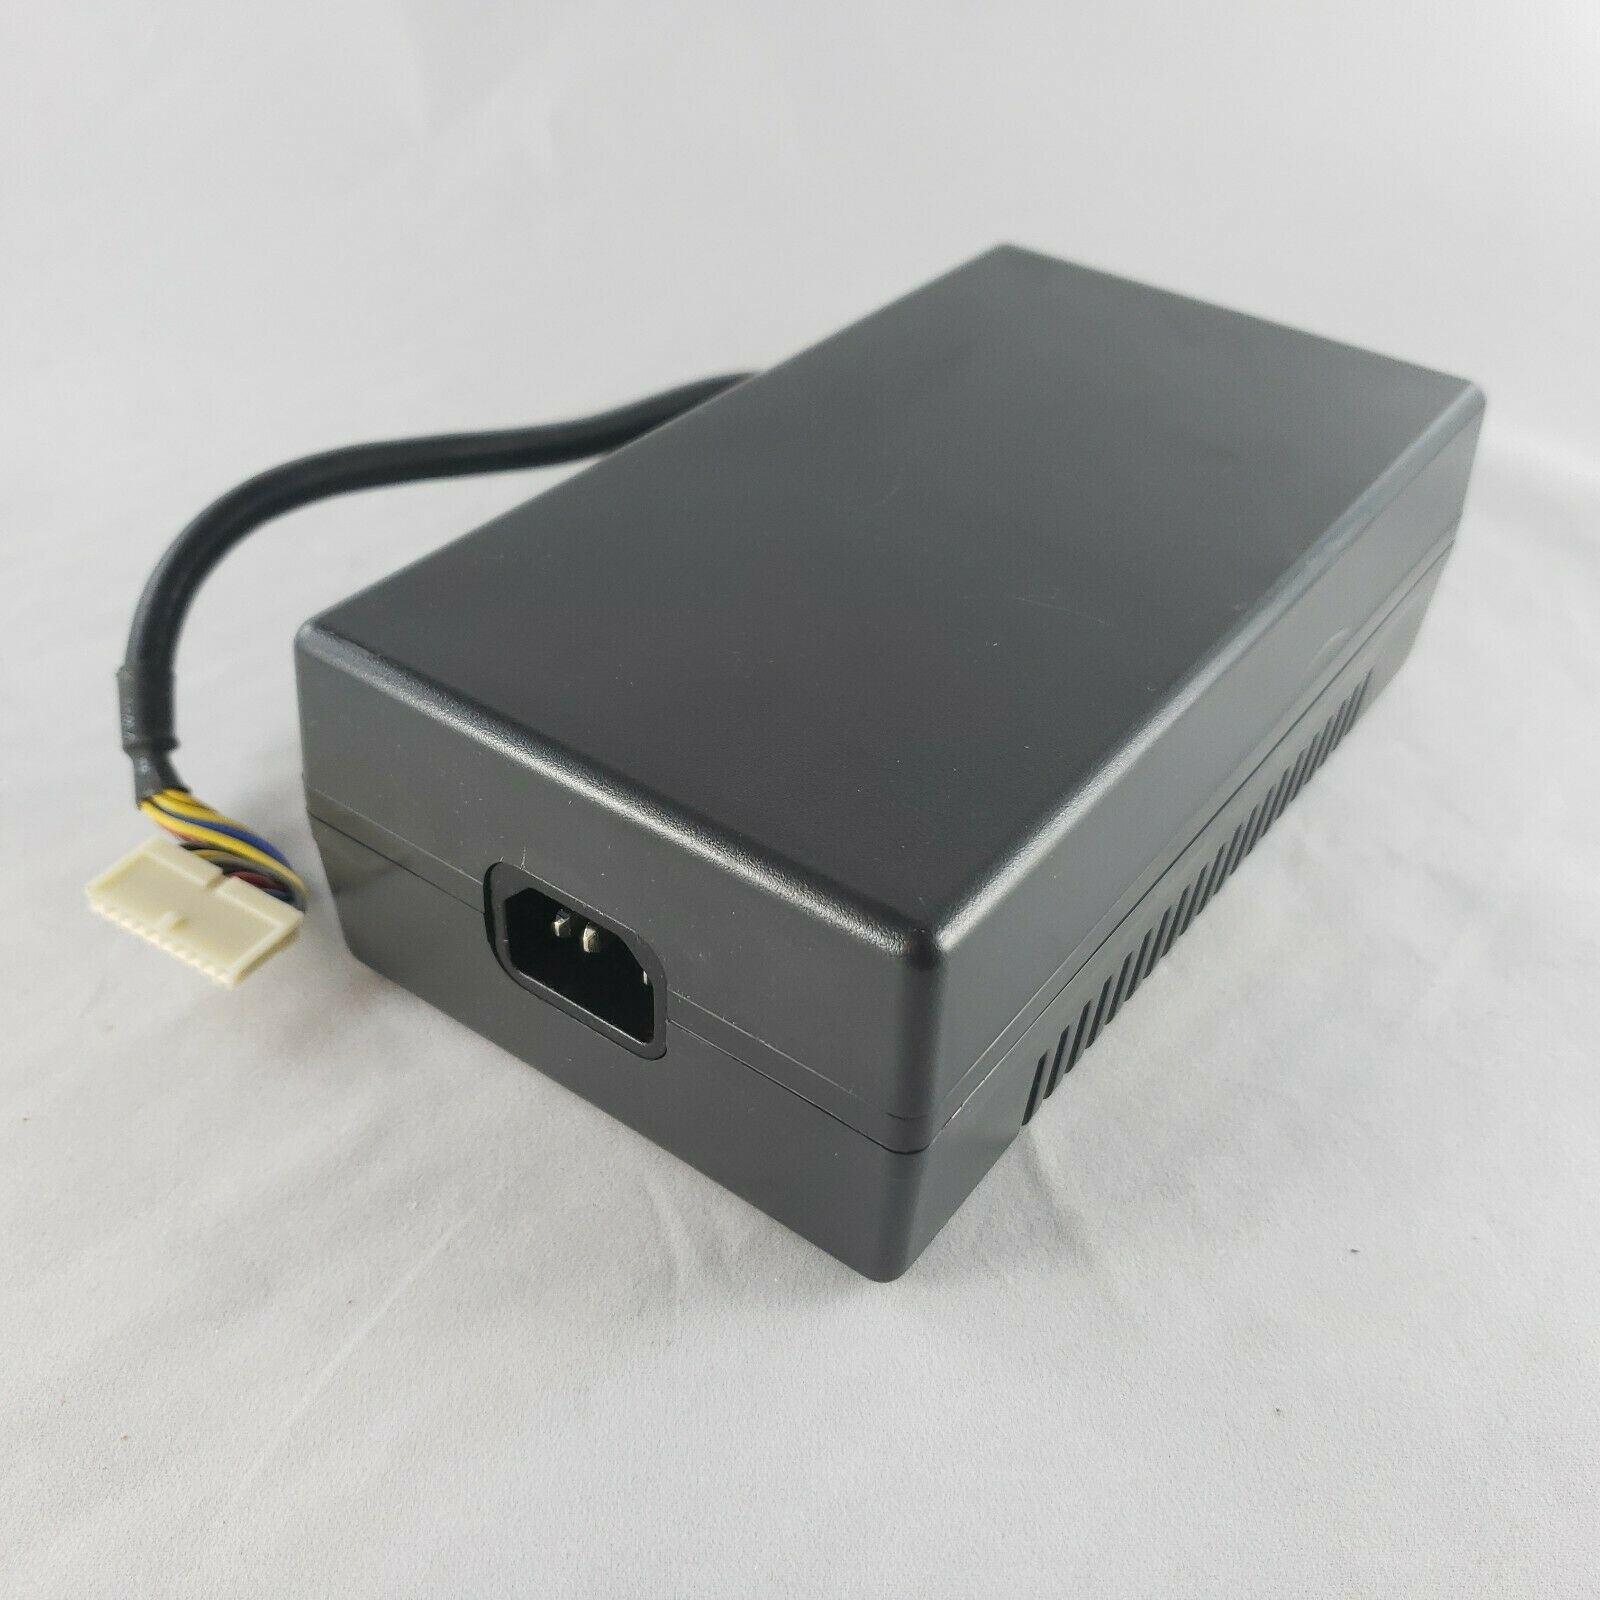 Power supply module for stacker and stacker/stapler – Power Supply for Stacker and Stacker/Stapler